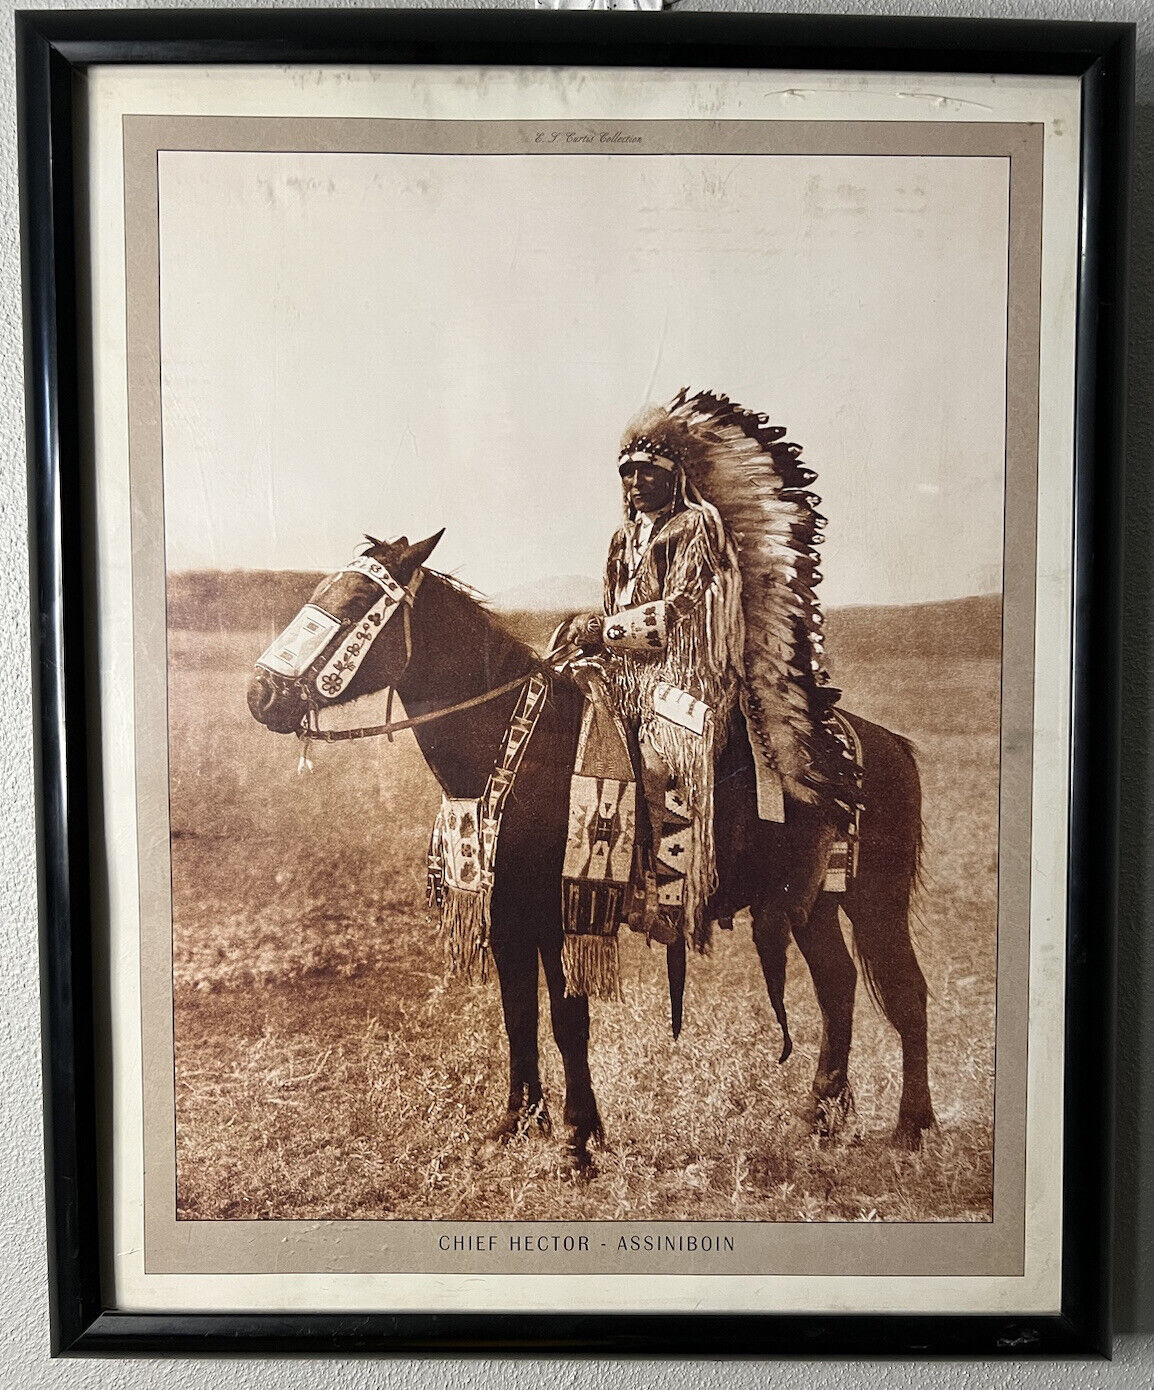 Chief Hector Assiniboin 1908 Native American Indian Reprint 16X20 Edward Curtis